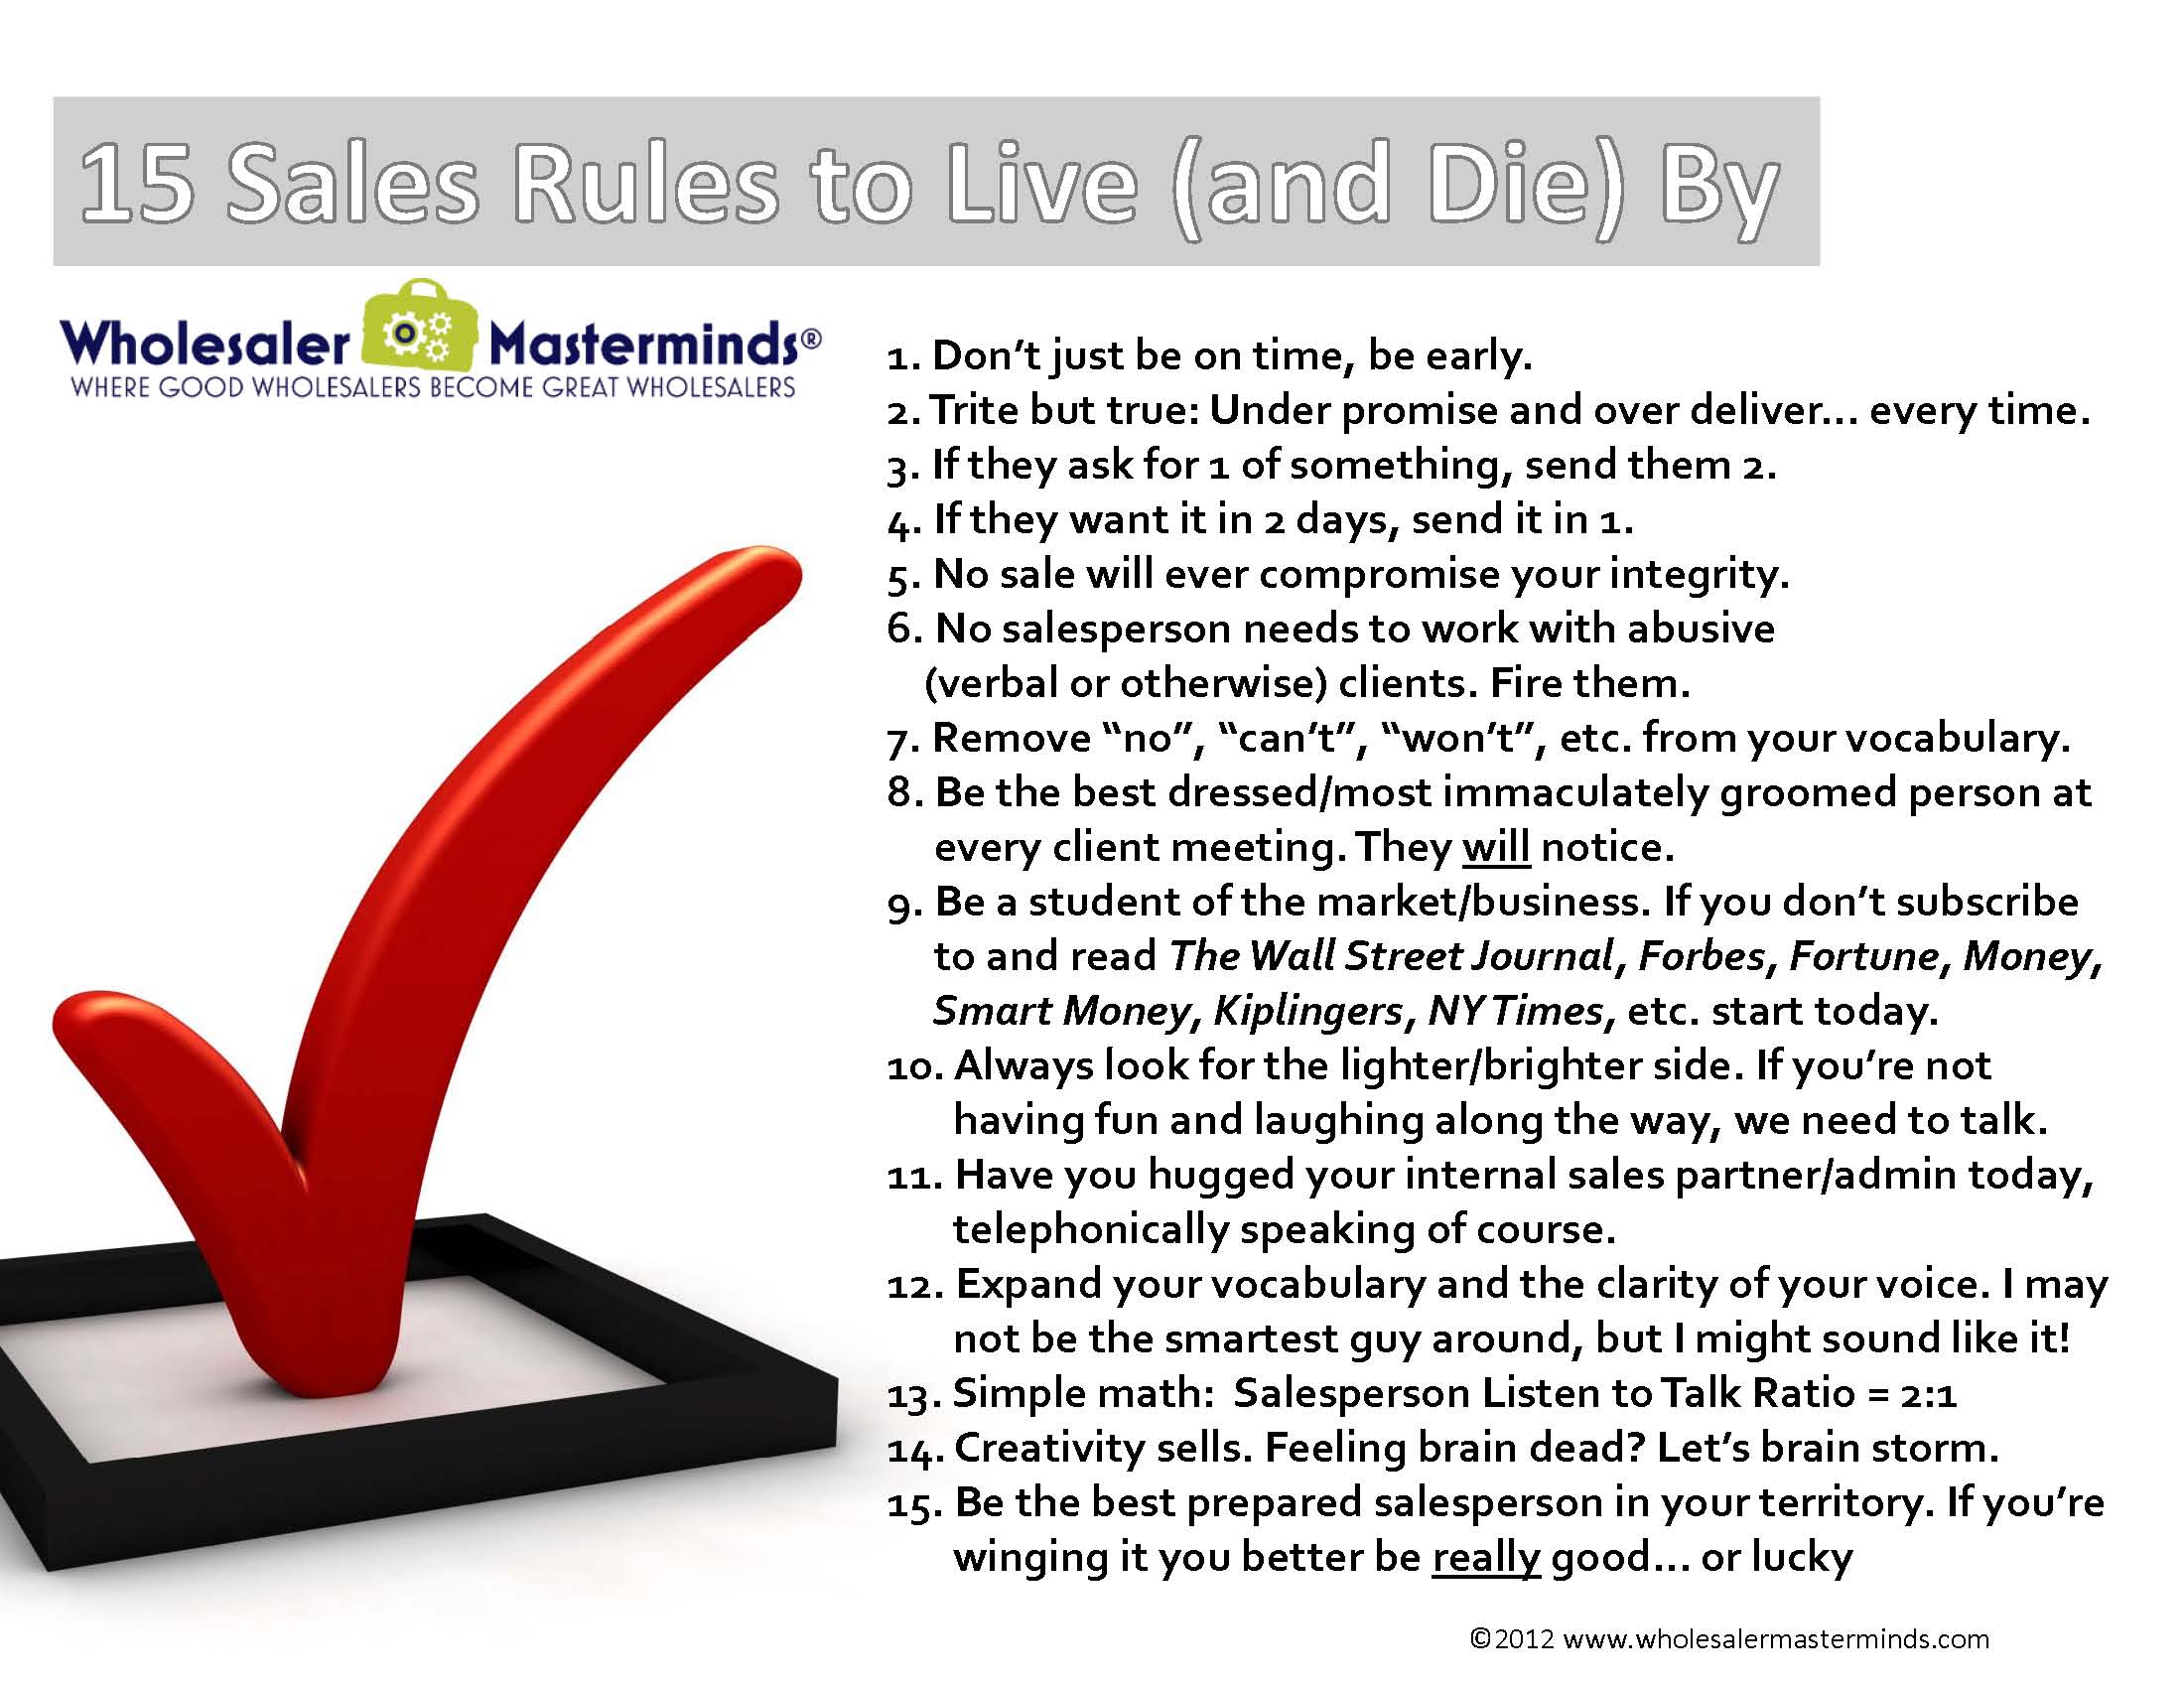 15 Sales Rules to Live and Die By